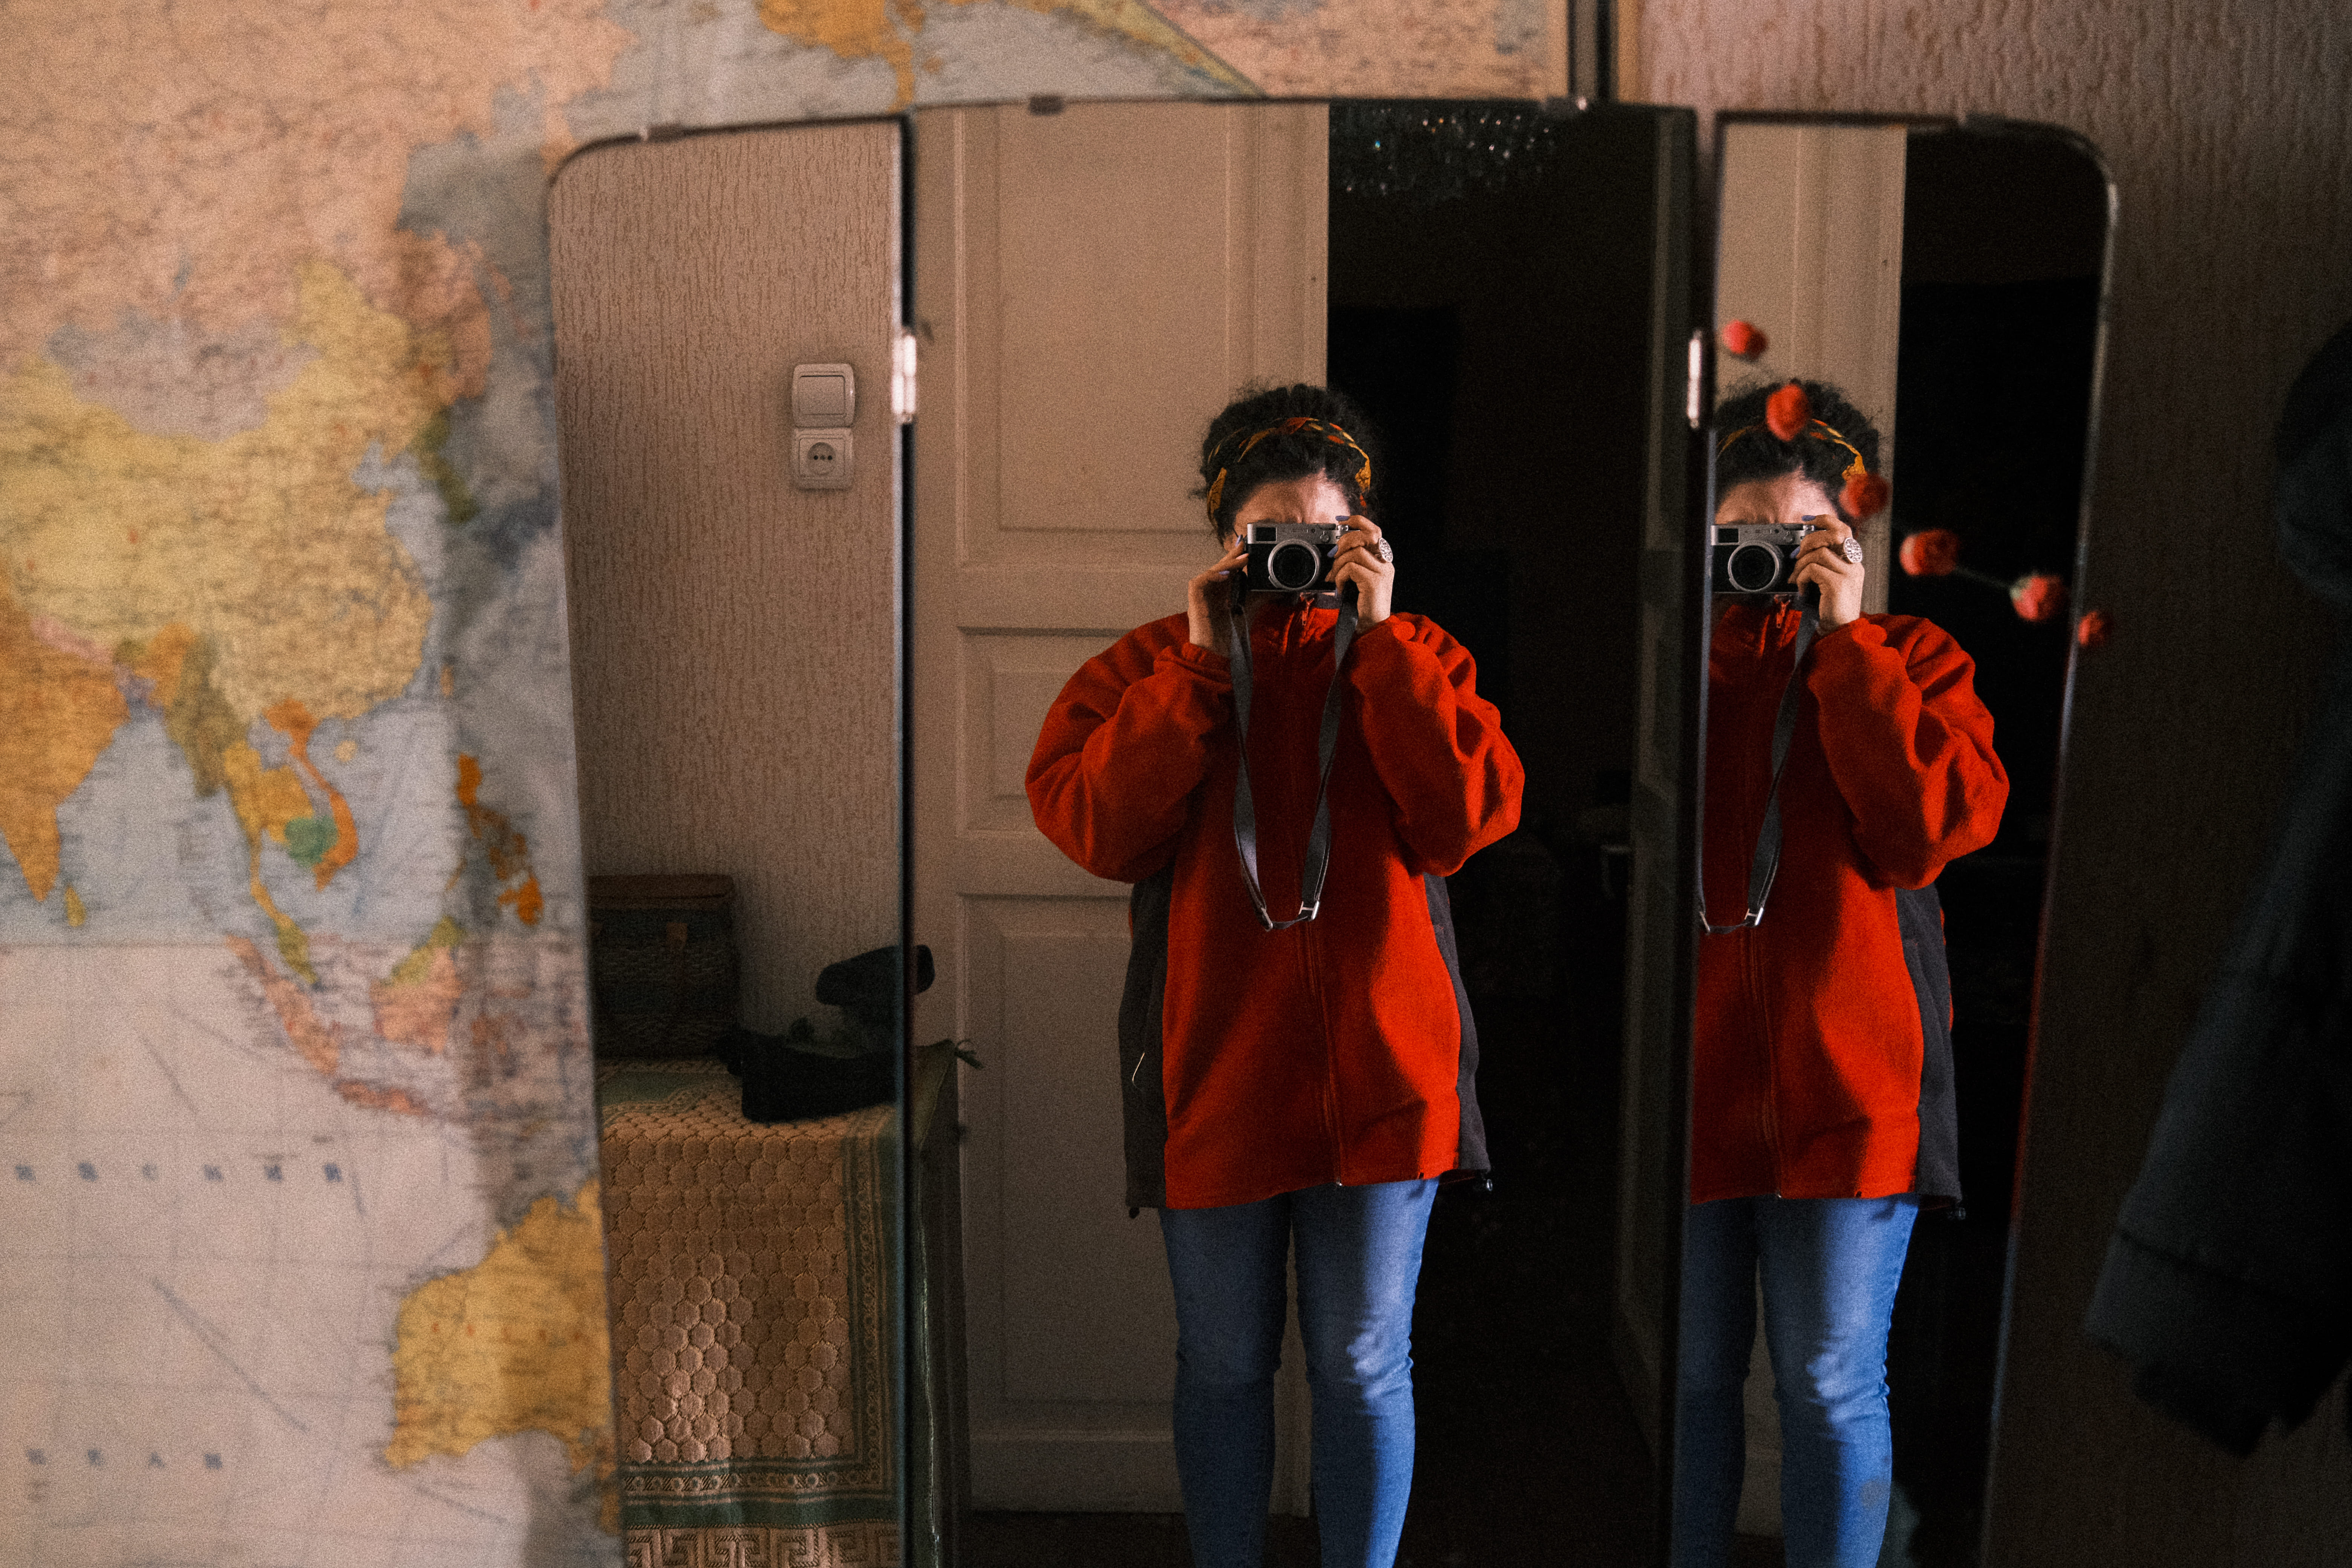 Self-portrait in my mom&rsquo;s jacket.

This photo essay was produced as part of the workshops led ...